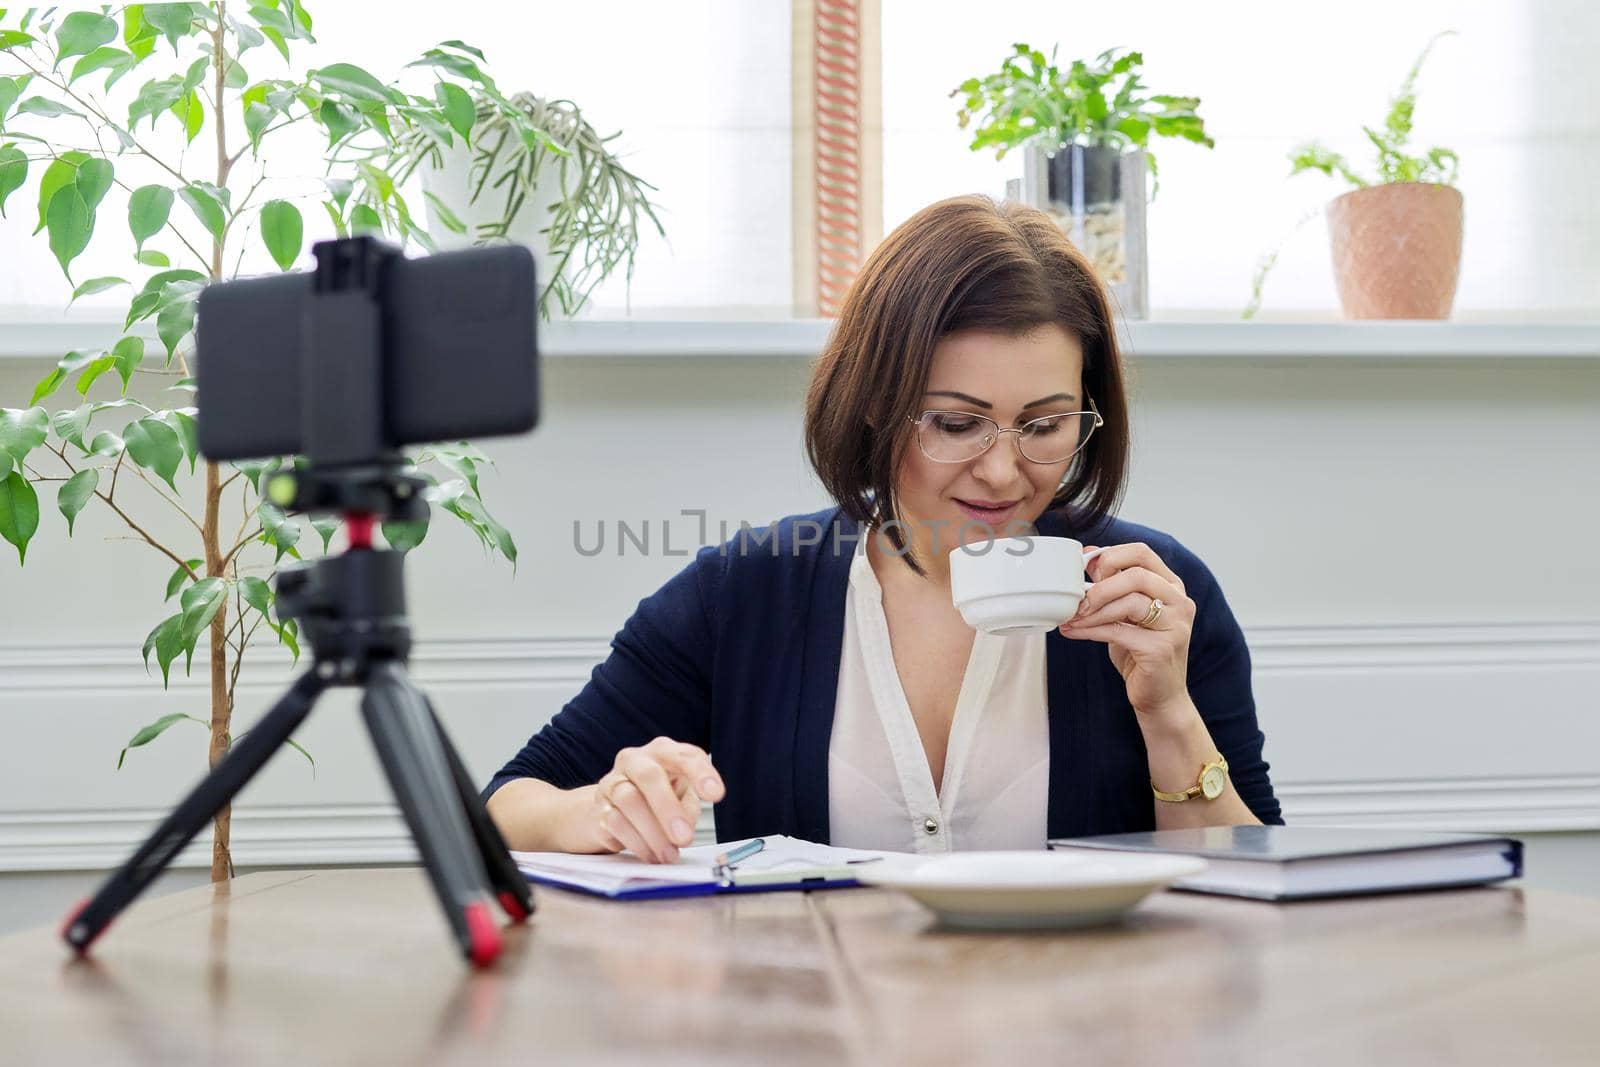 Middle aged business woman, counselor, mentor in video meeting, using smartphone on tripod. Positive female with cup of coffee talking looking in webcam. Video consultations, freelancing, remote business, online education